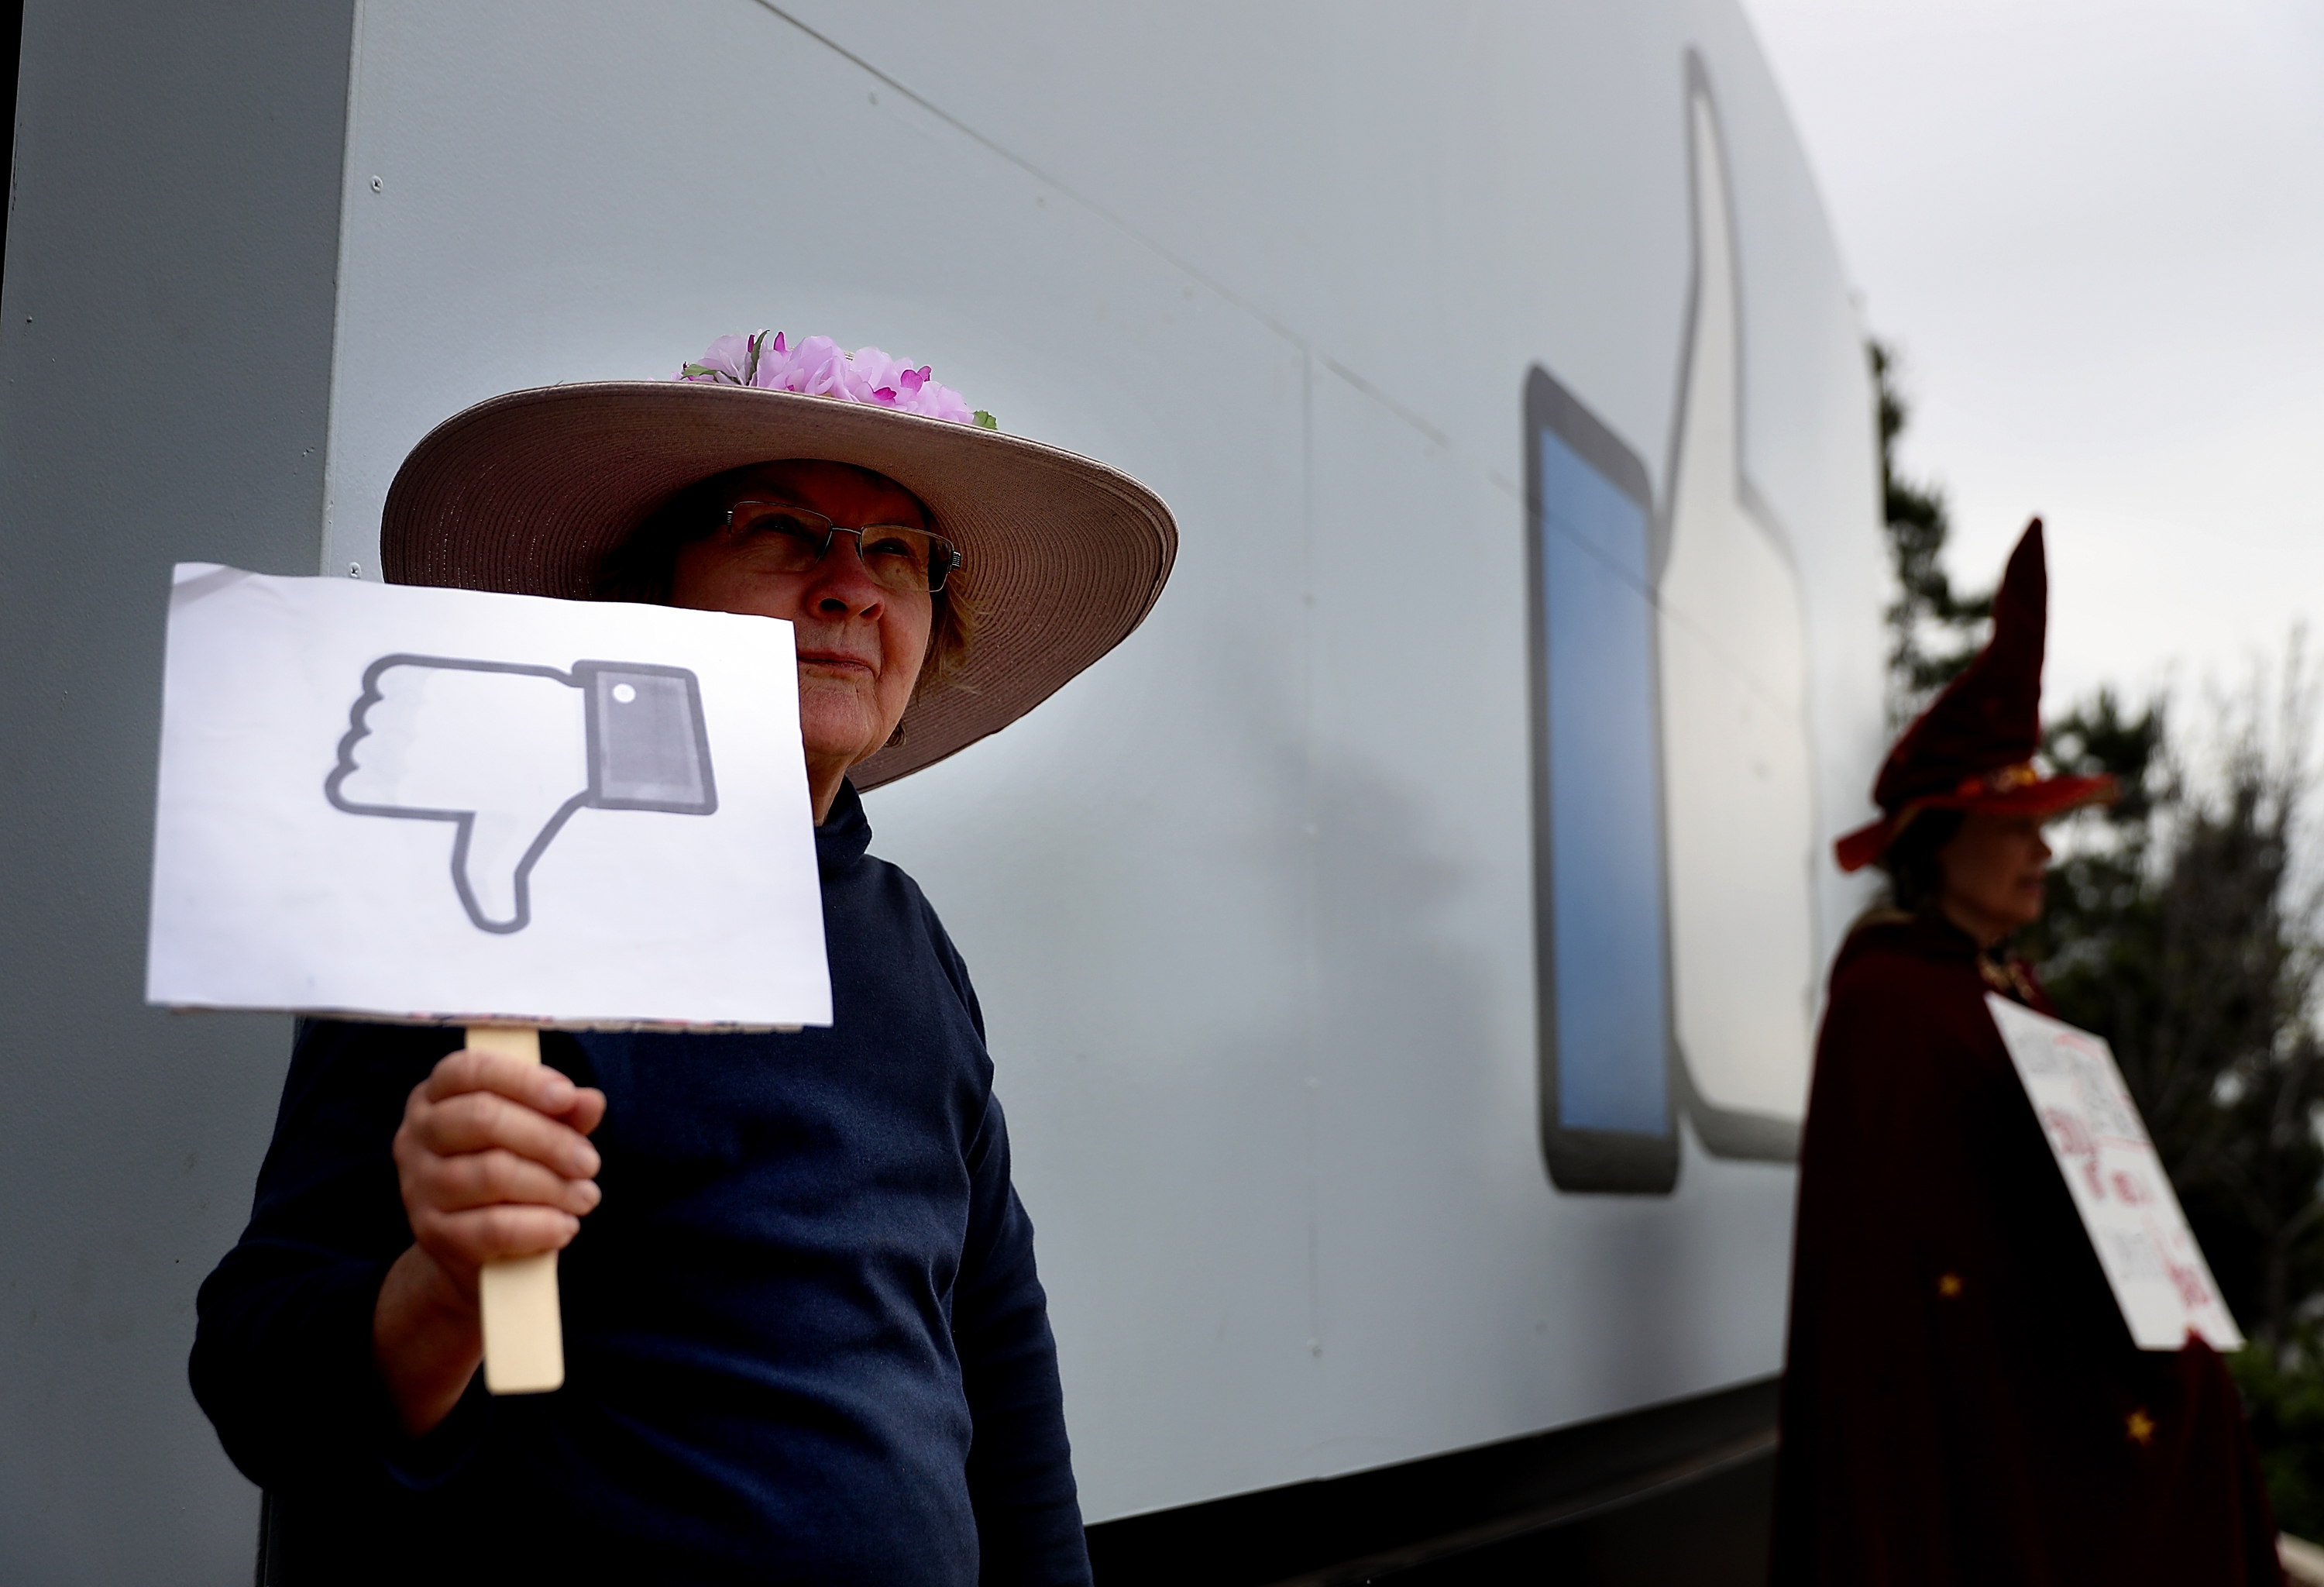 A protester with the group ‘Raging Grannies’ holds a sign during a demonstration outside of Facebook headquarters on April 5, 2018 in Menlo Park, California.&nbsp;